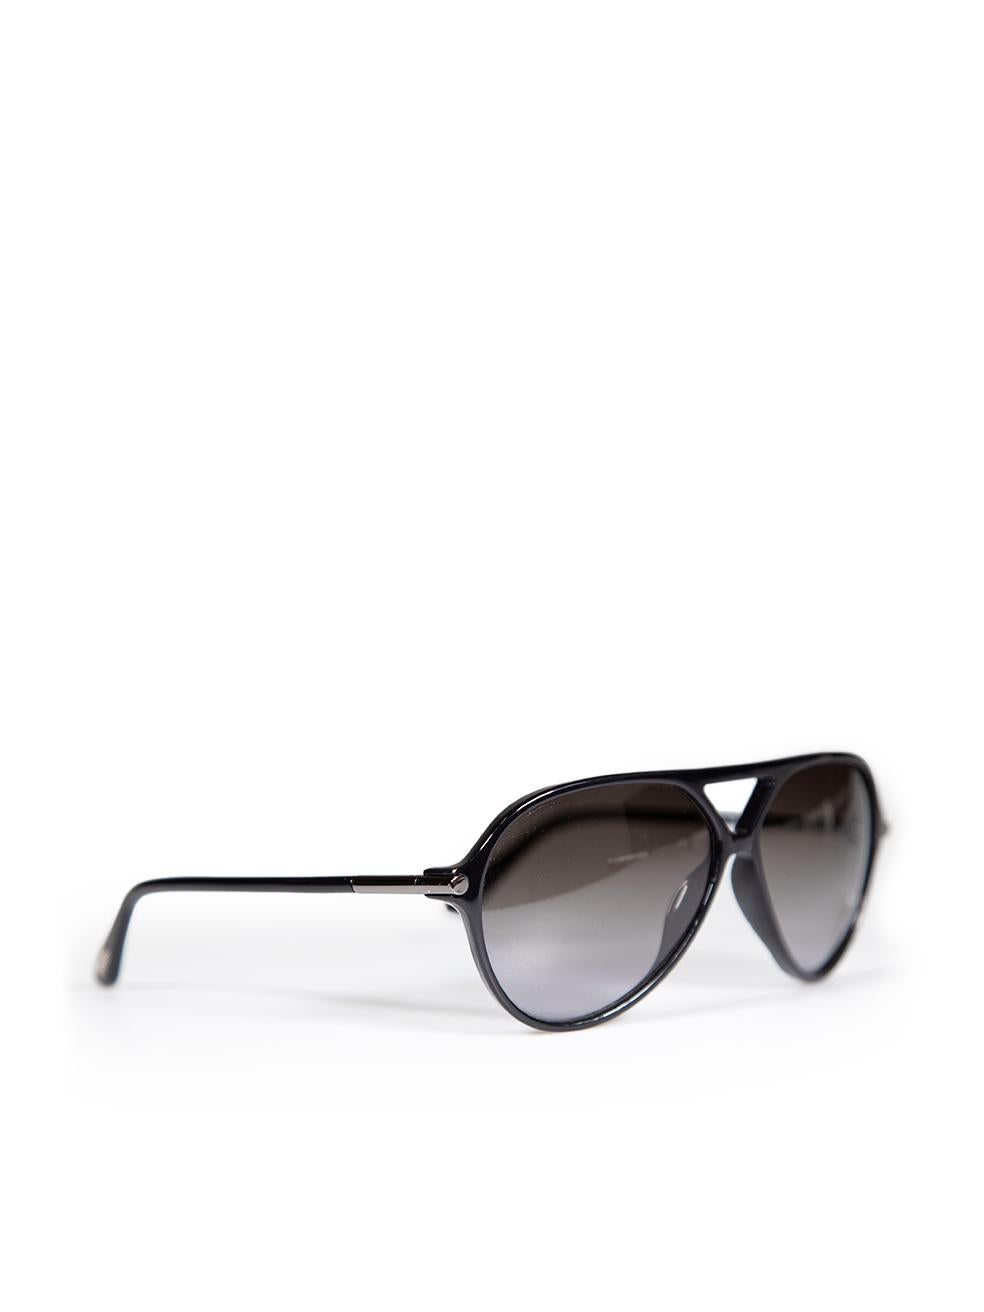 Tom Ford Shiny Black Leopold Sunglasses In New Condition In London, GB